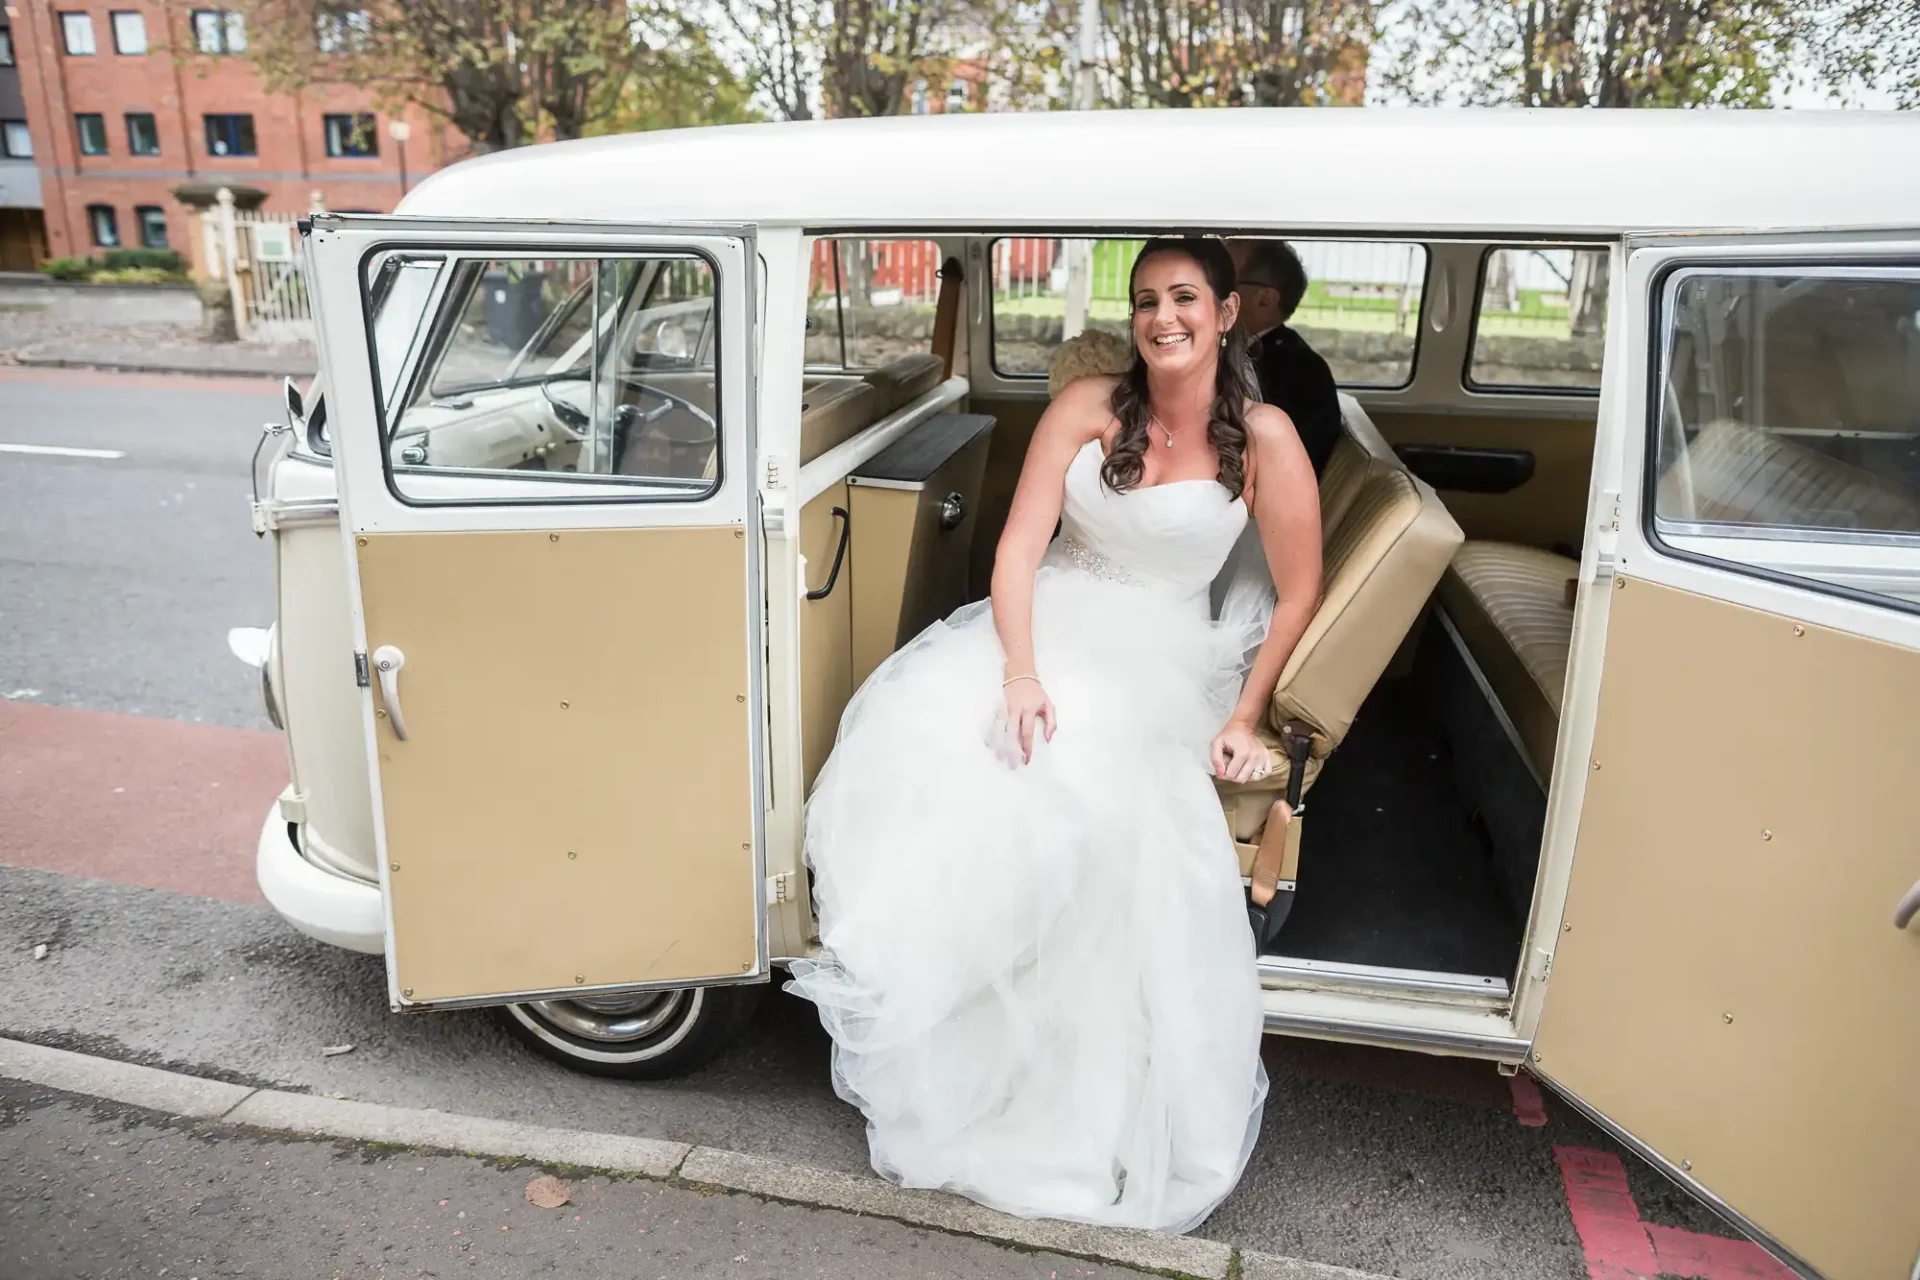 Bride in a white dress smiling as she exits a vintage van on a city street.